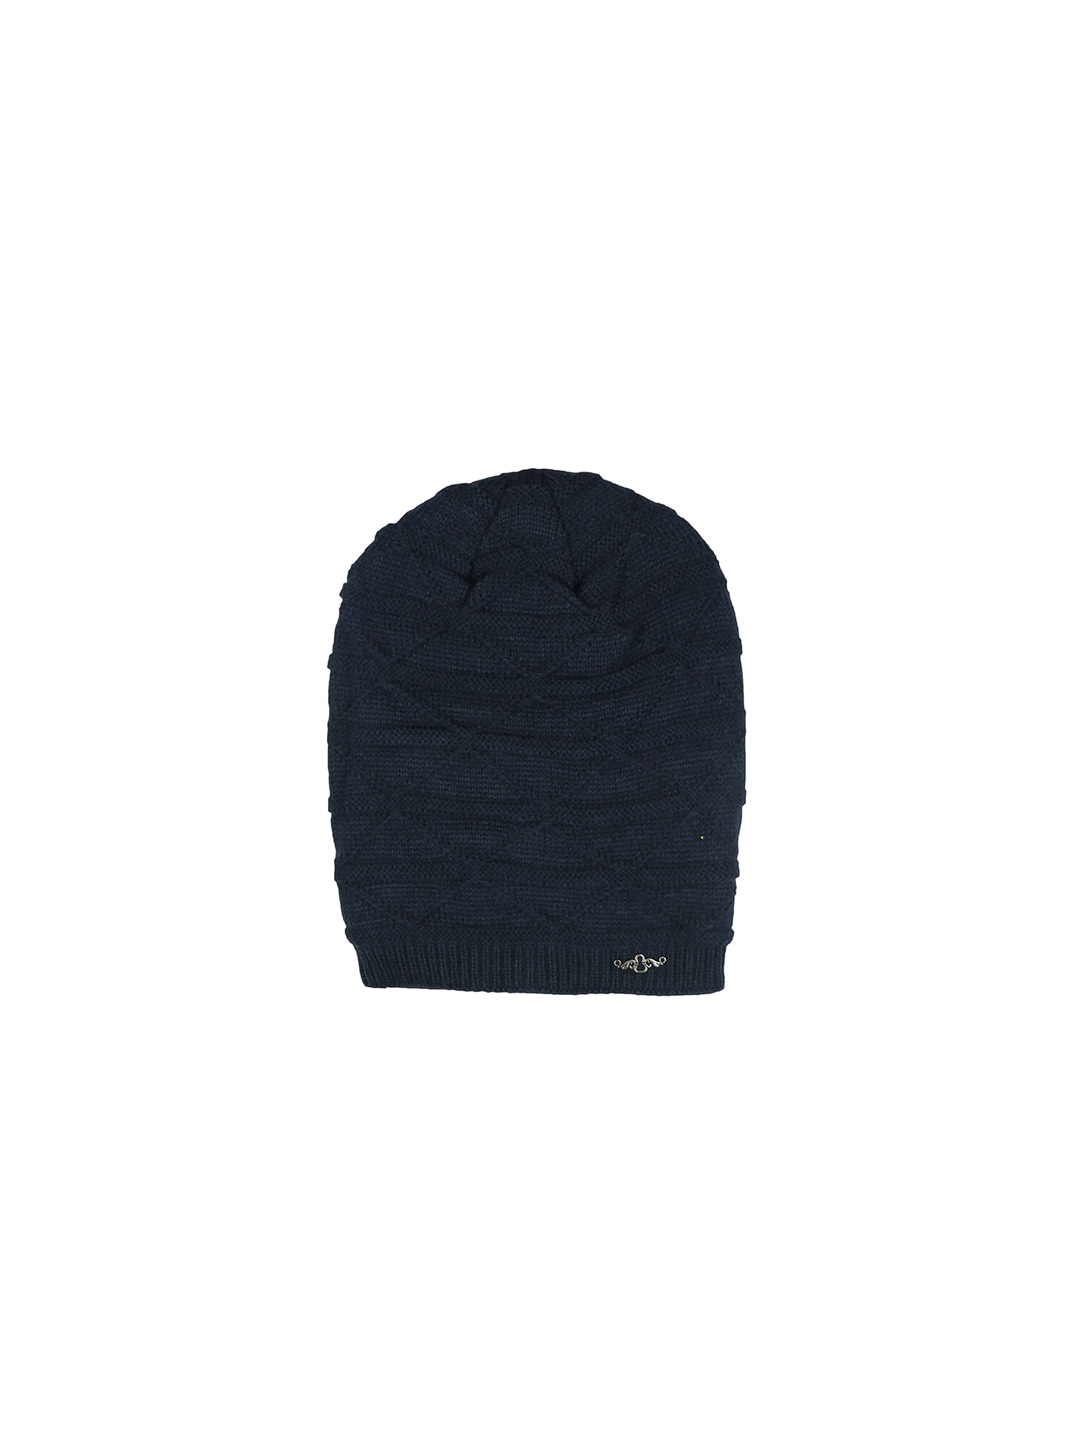 iSWEVEN Unisex Blue Solid Beanie Price in India